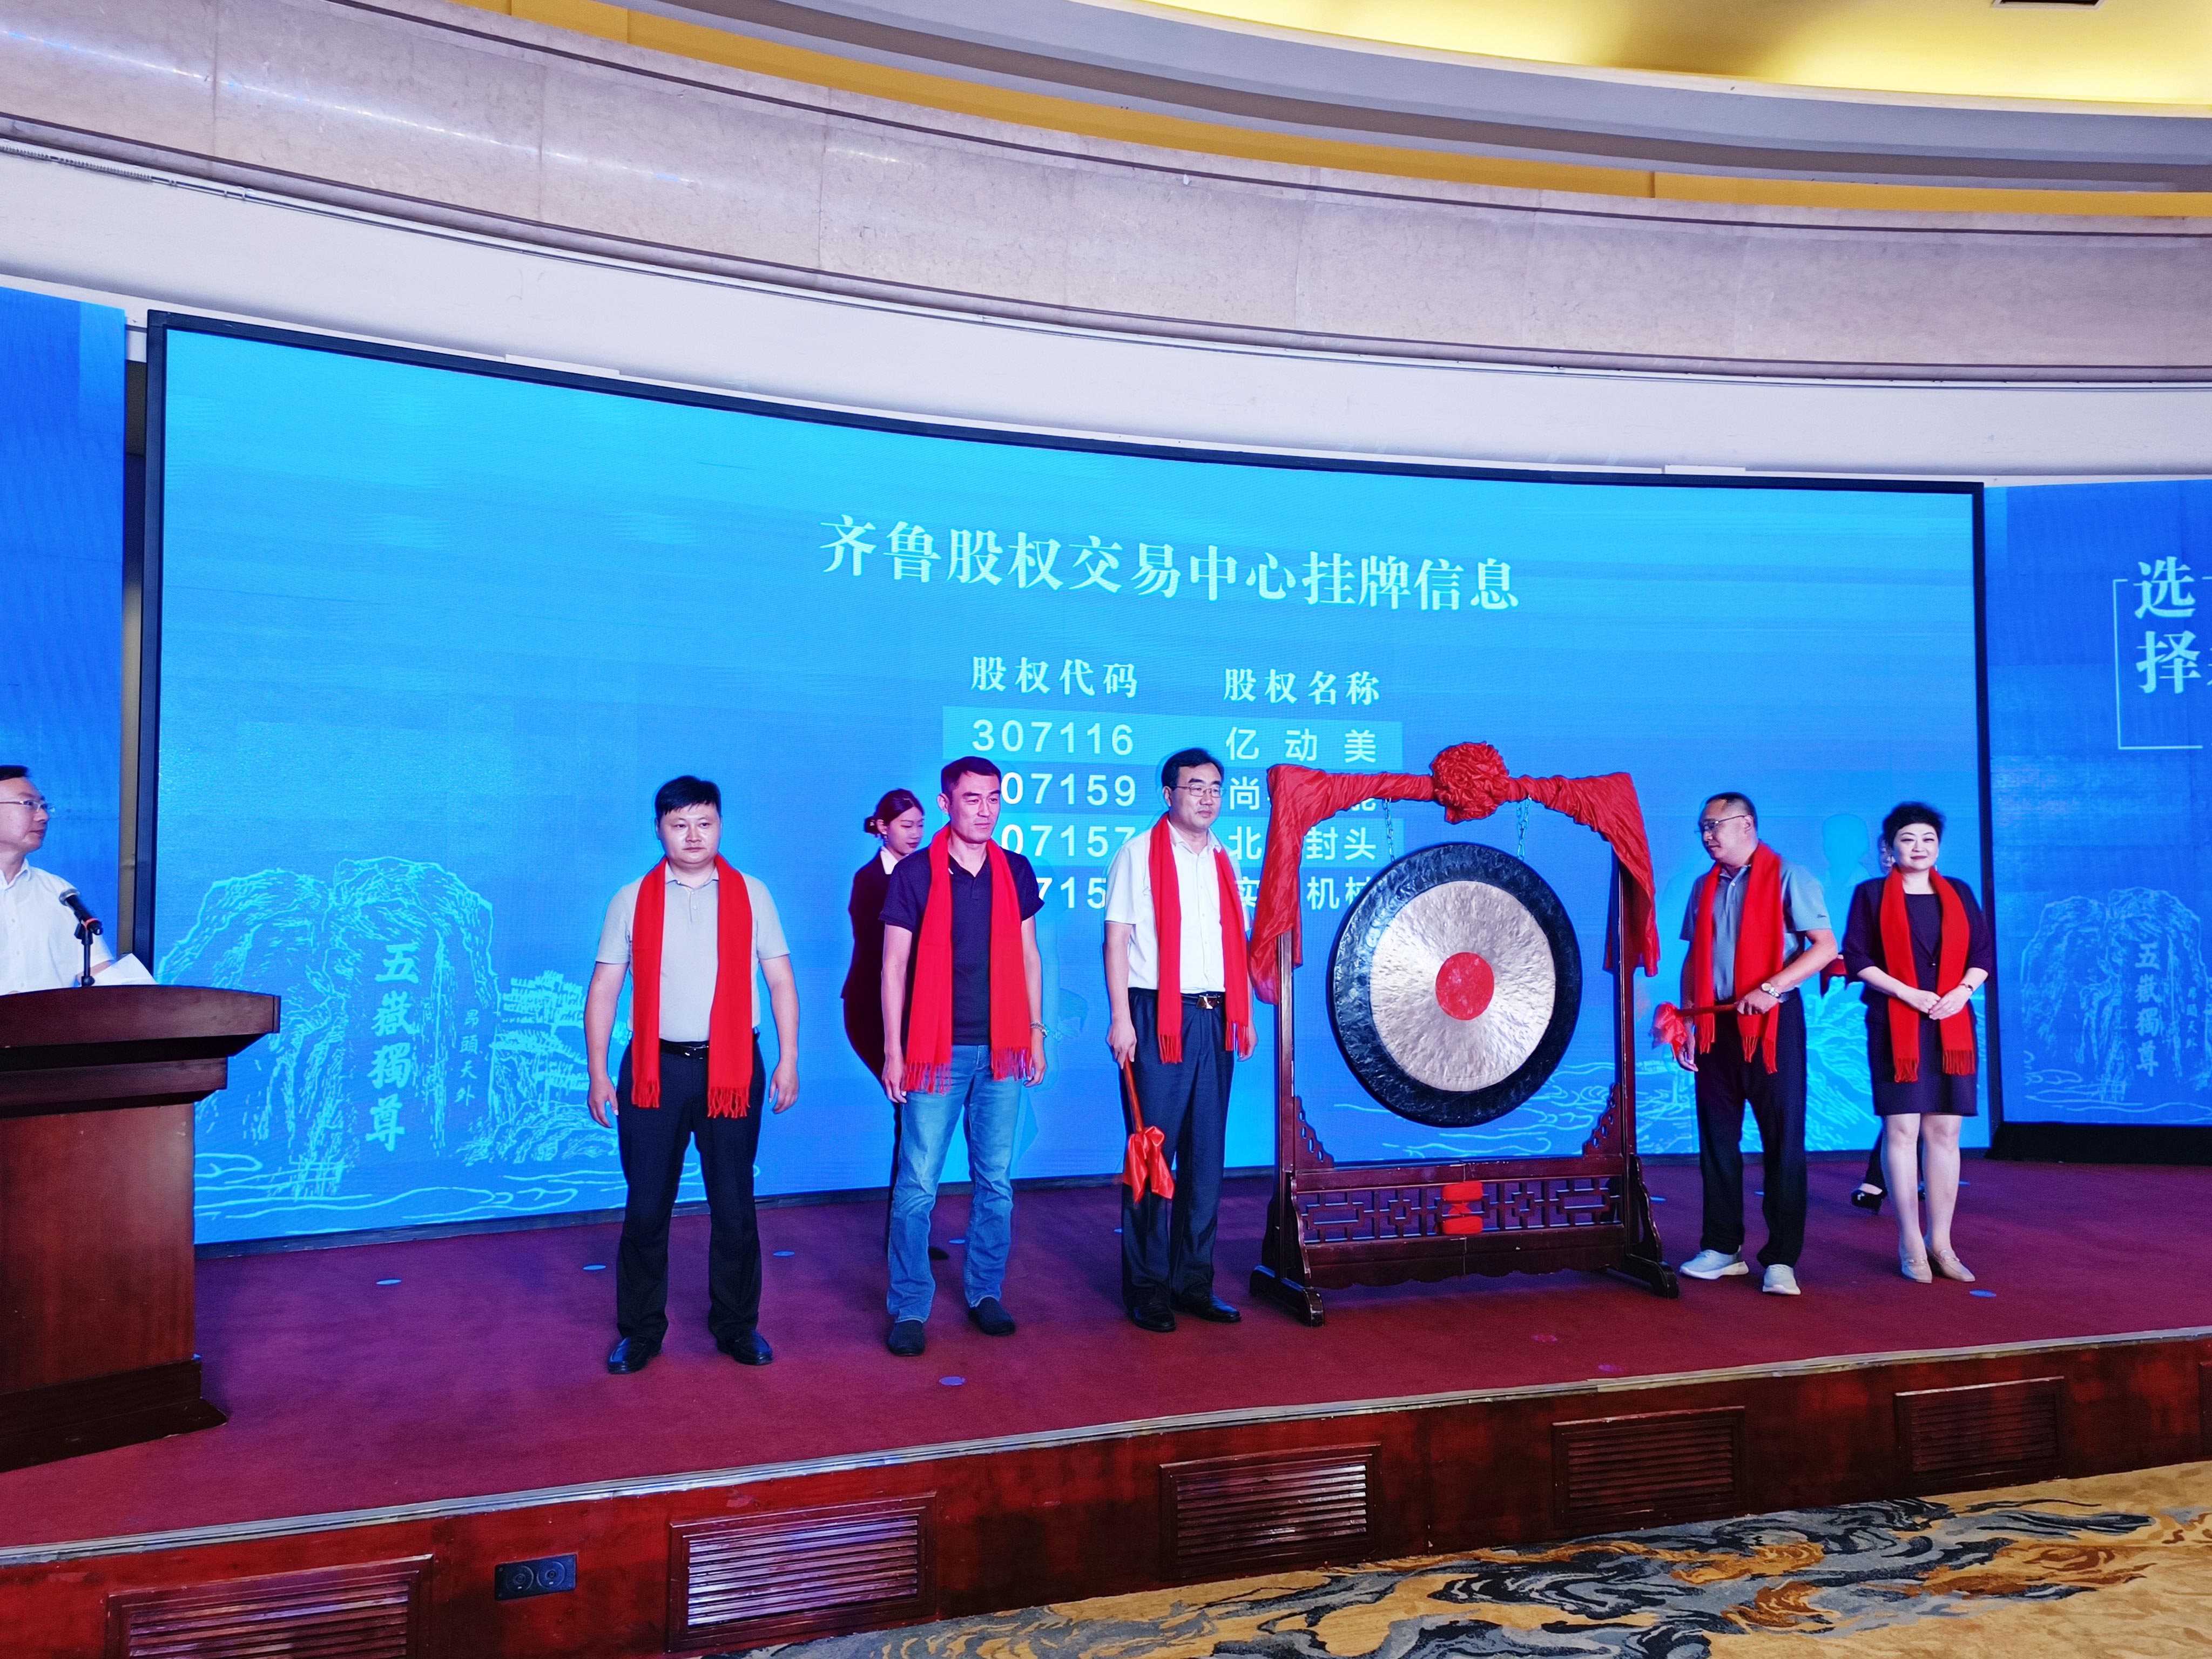 Warmly celebrate the listing of Taian Strength EquipmentQilu Equity Exchange Cen